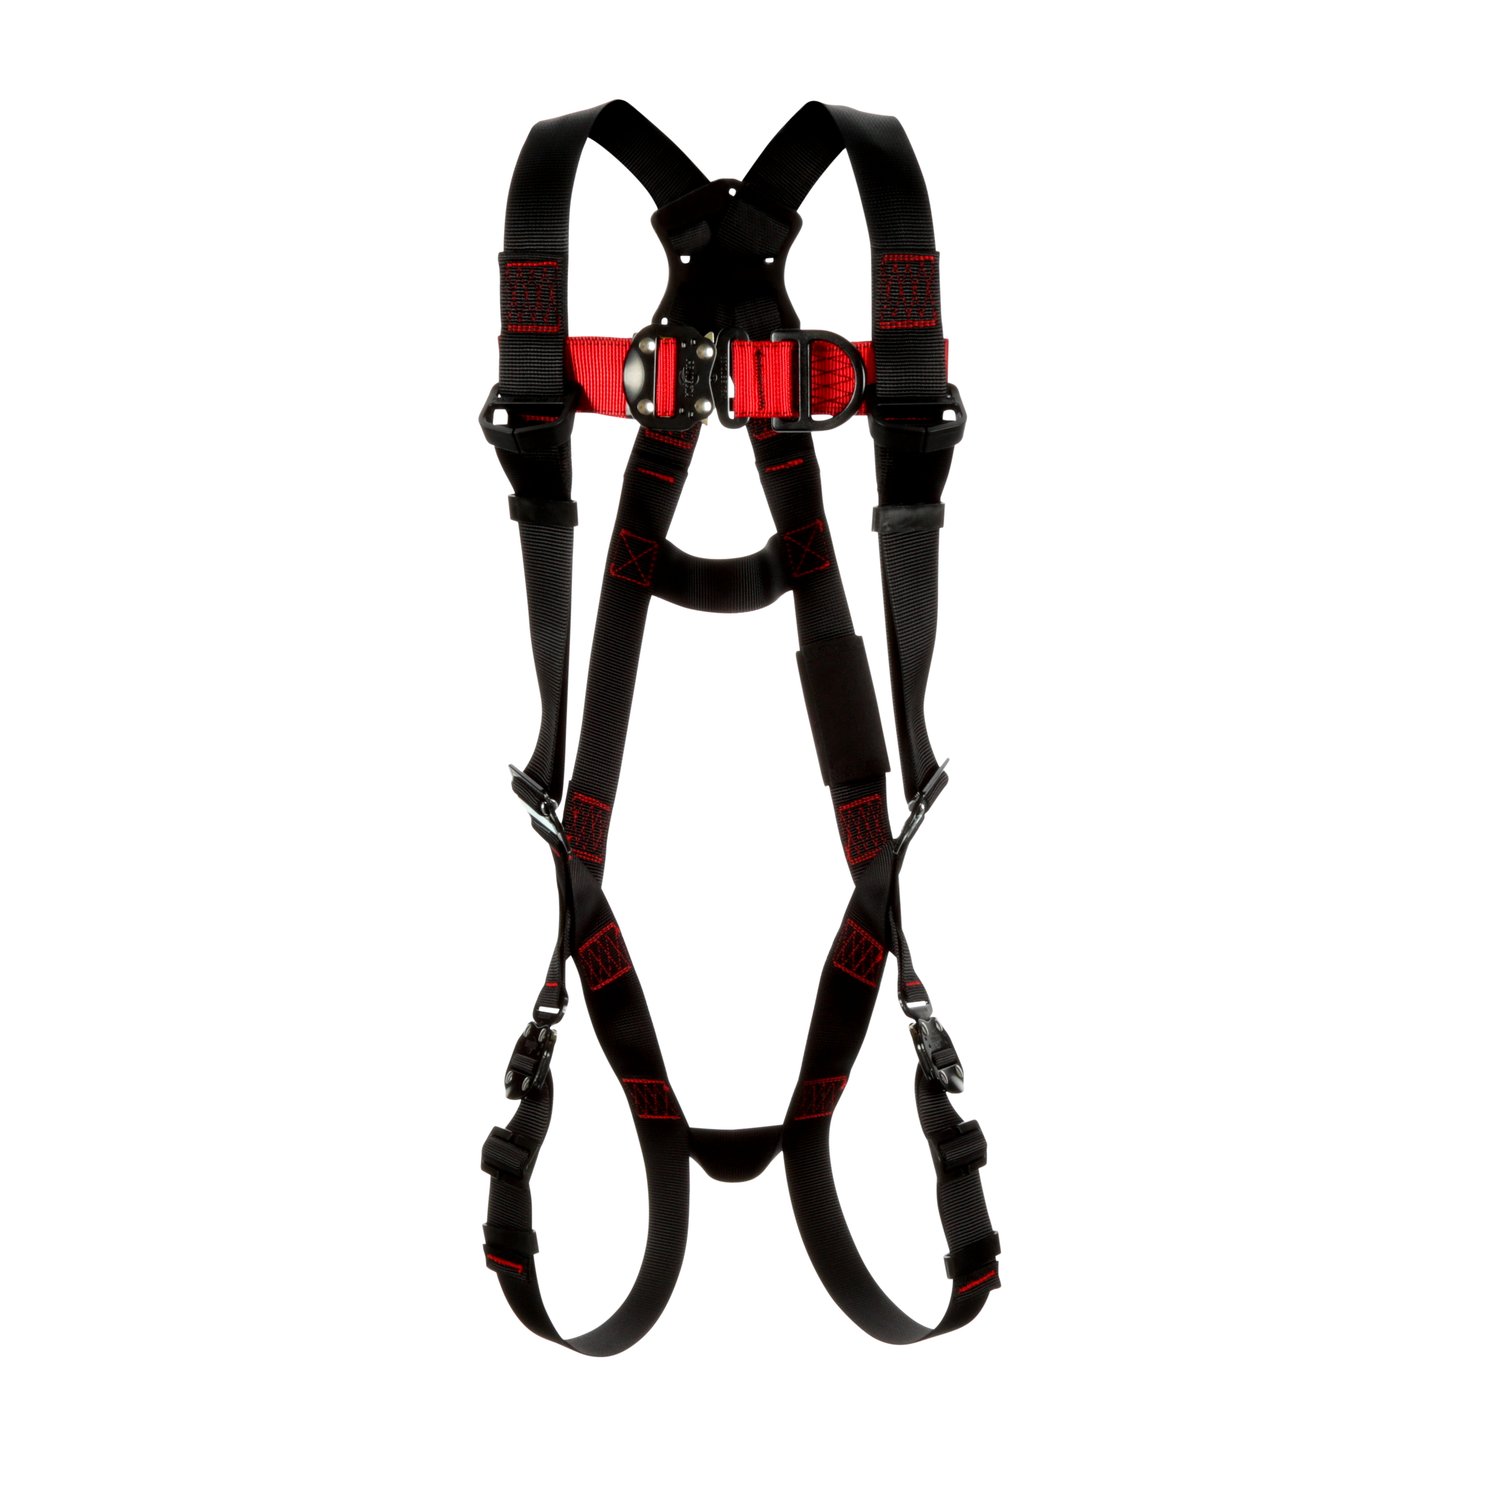 7100184680 - 3M Protecta P200 Vest Climbing Safety Harness 1161558, X-Large